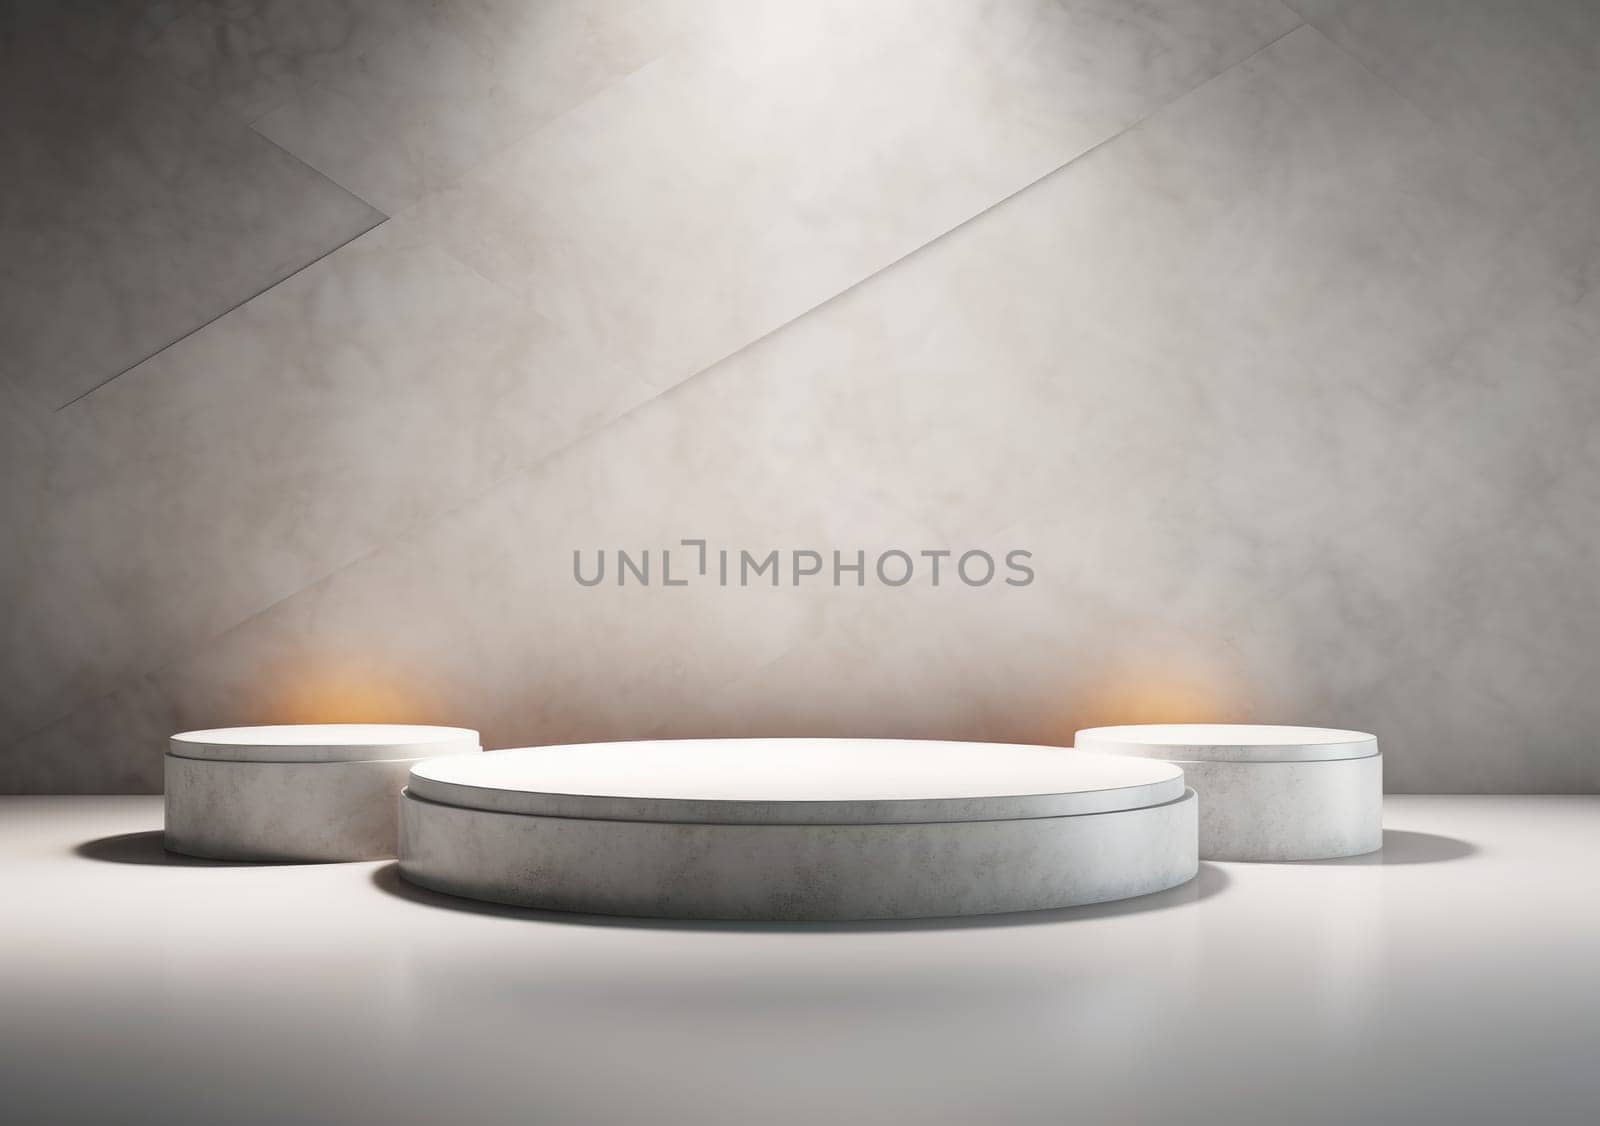 abstract modern minimal background with cobblestones on the wet floor. Trendy showcase with golden round frame and empty platform for product displaying.